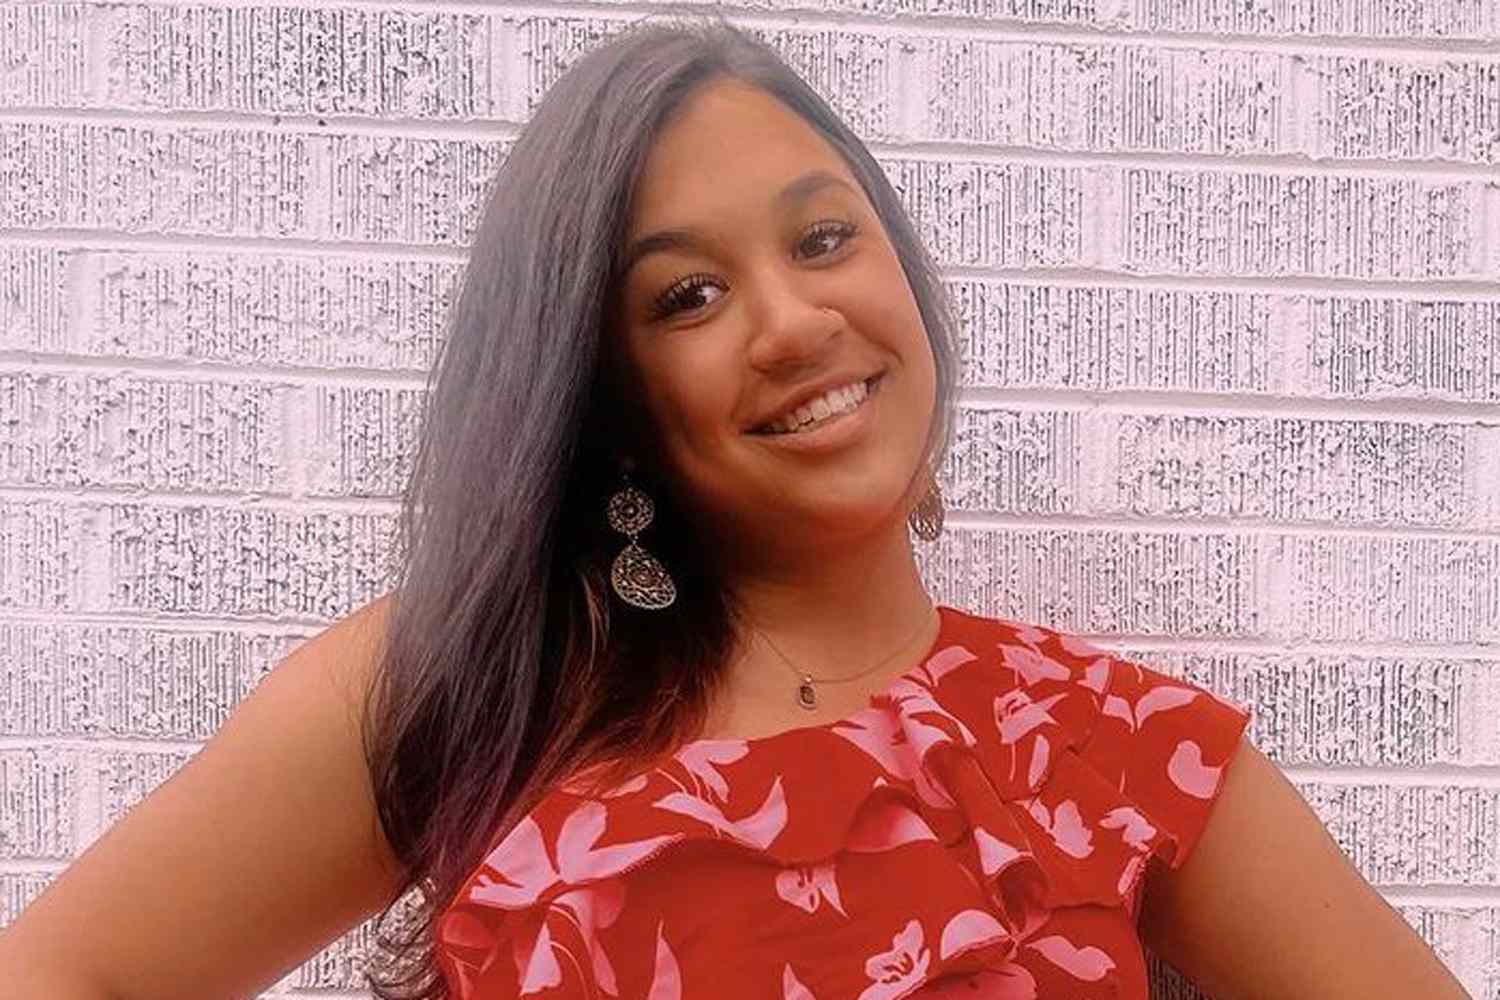 High School Senior Dies Days Before Graduation After Heavy Winds Cause Tree to Fall on Camper: ‘A Loss’